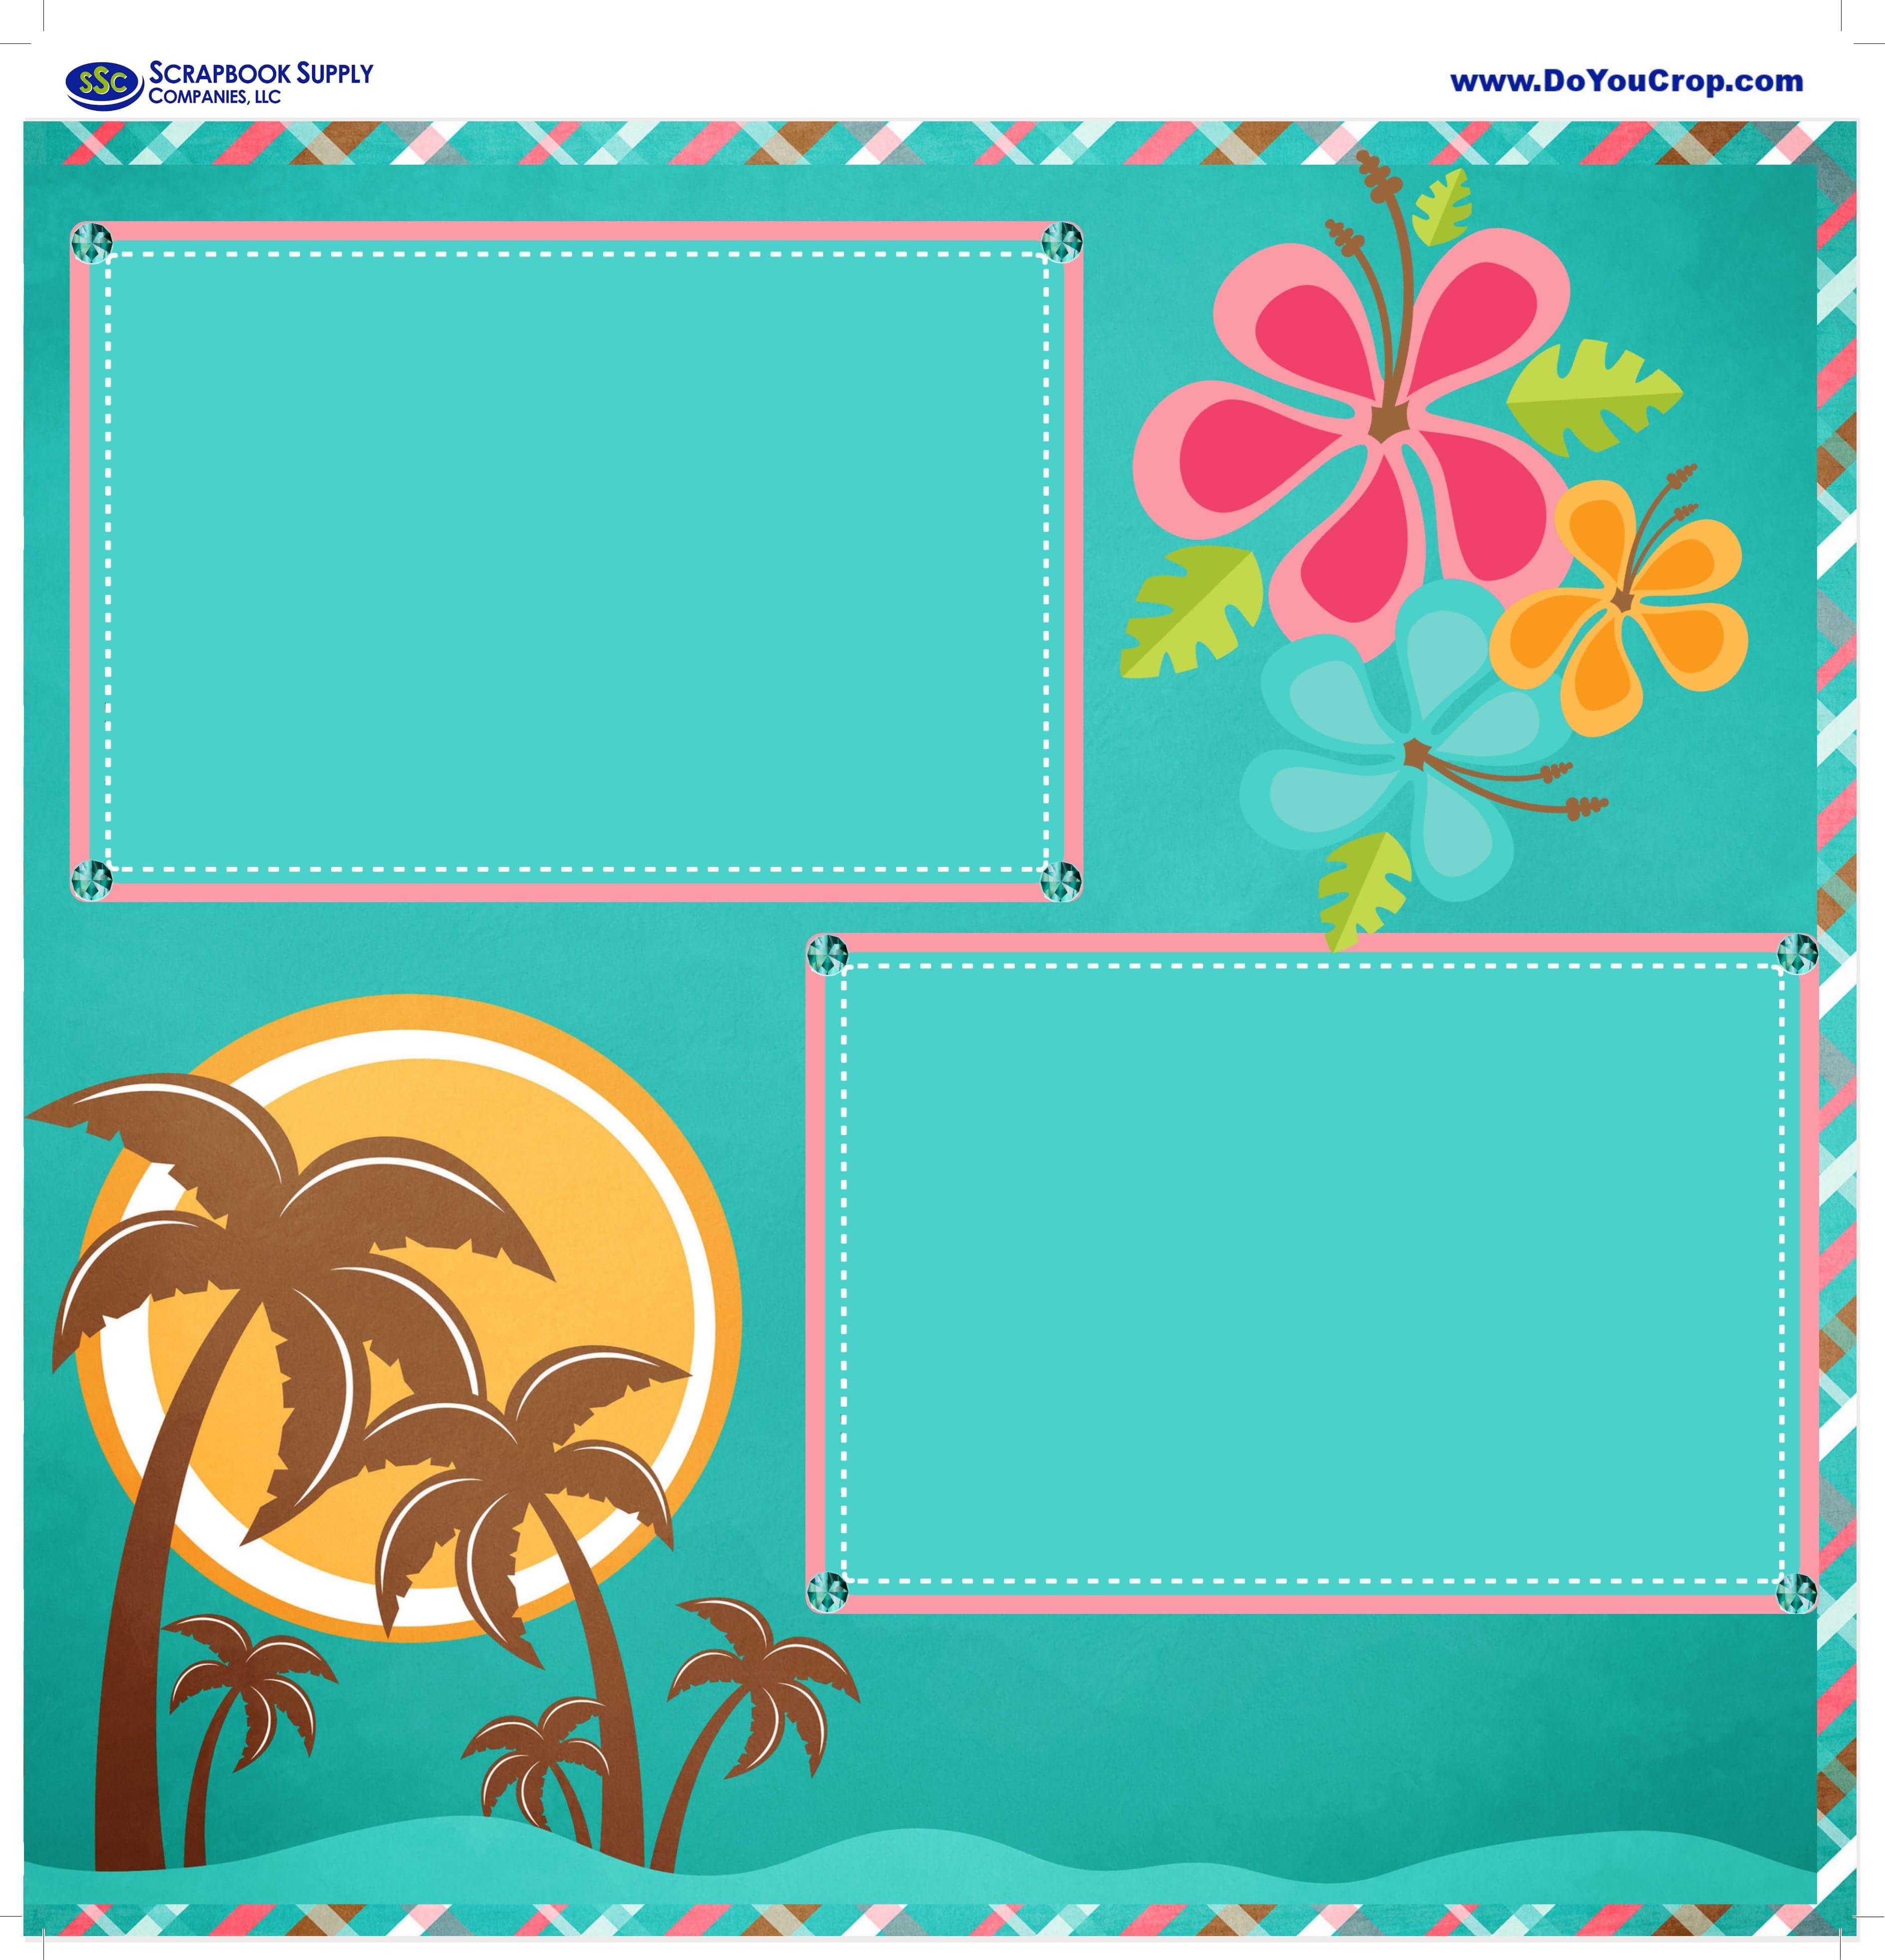 Tropical Paradise (2) - 12 x 12 Premade, Printed Scrapbook Pages by SSC Designs - Scrapbook Supply Companies